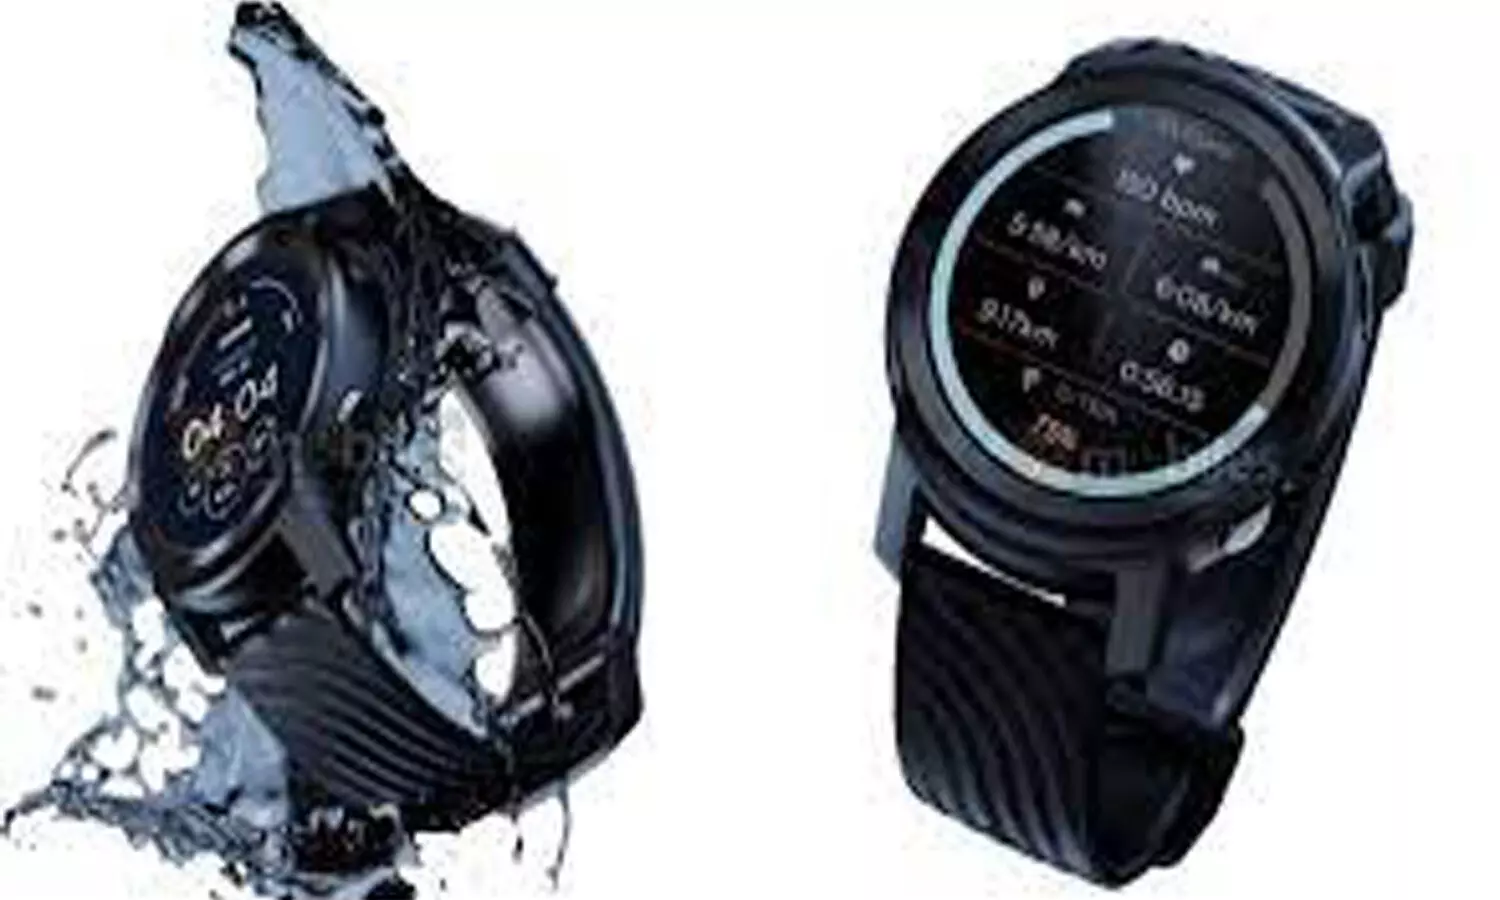 Moto Watch 100 all set for launch; Check Price & Specifications!